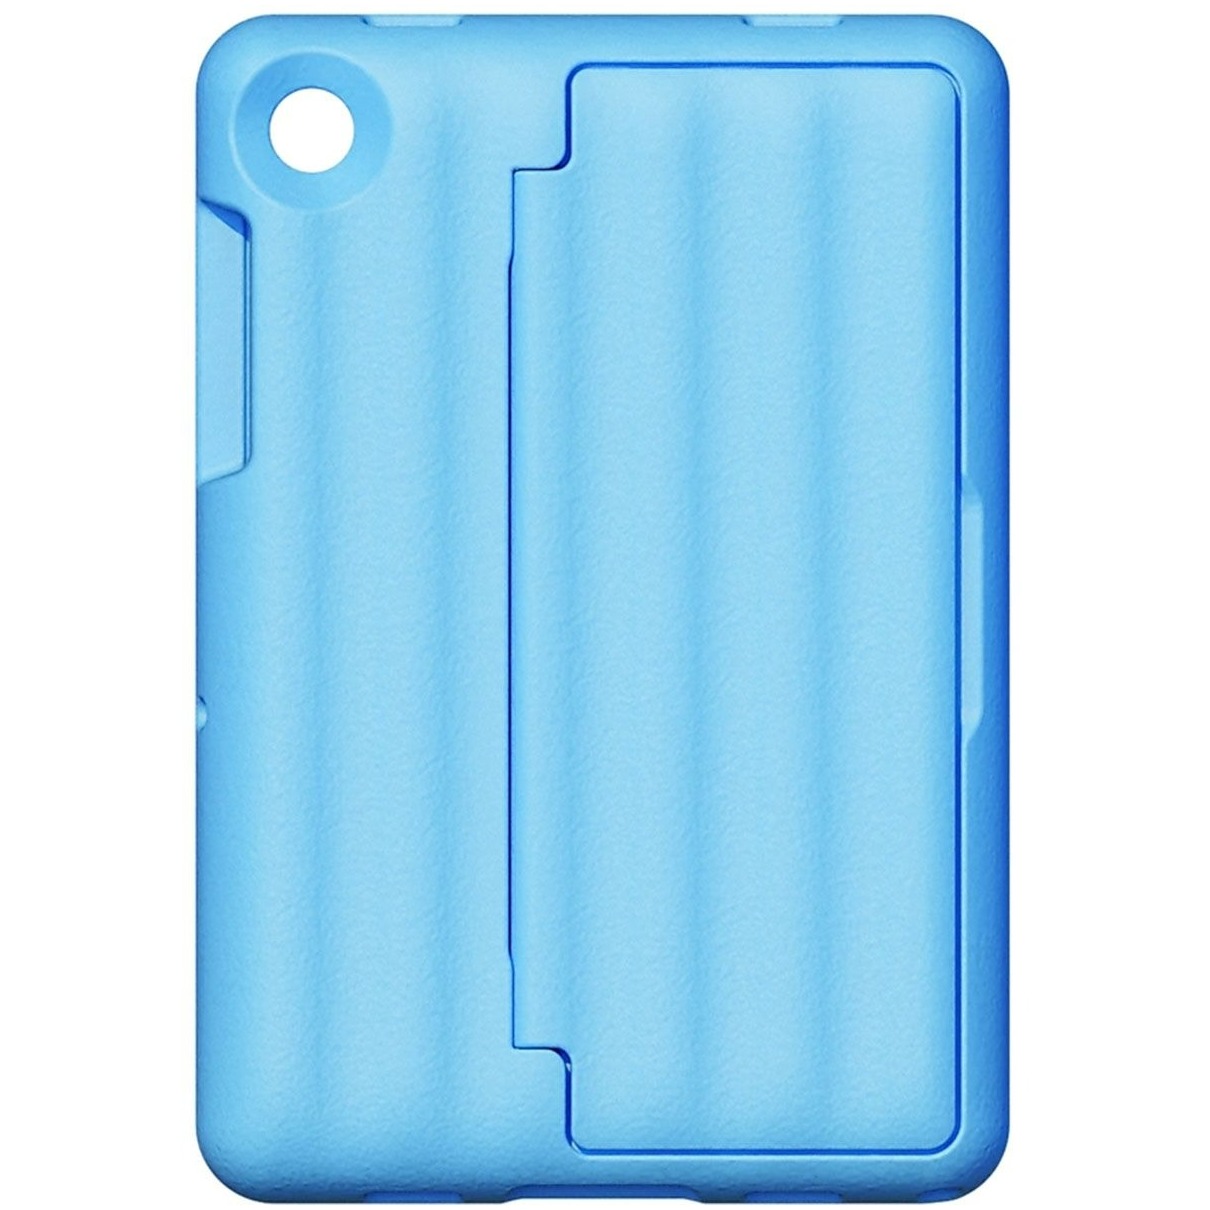 Samsung Puffy Cover voor Galaxy Tab A9 Plus Tablethoesje Blauw